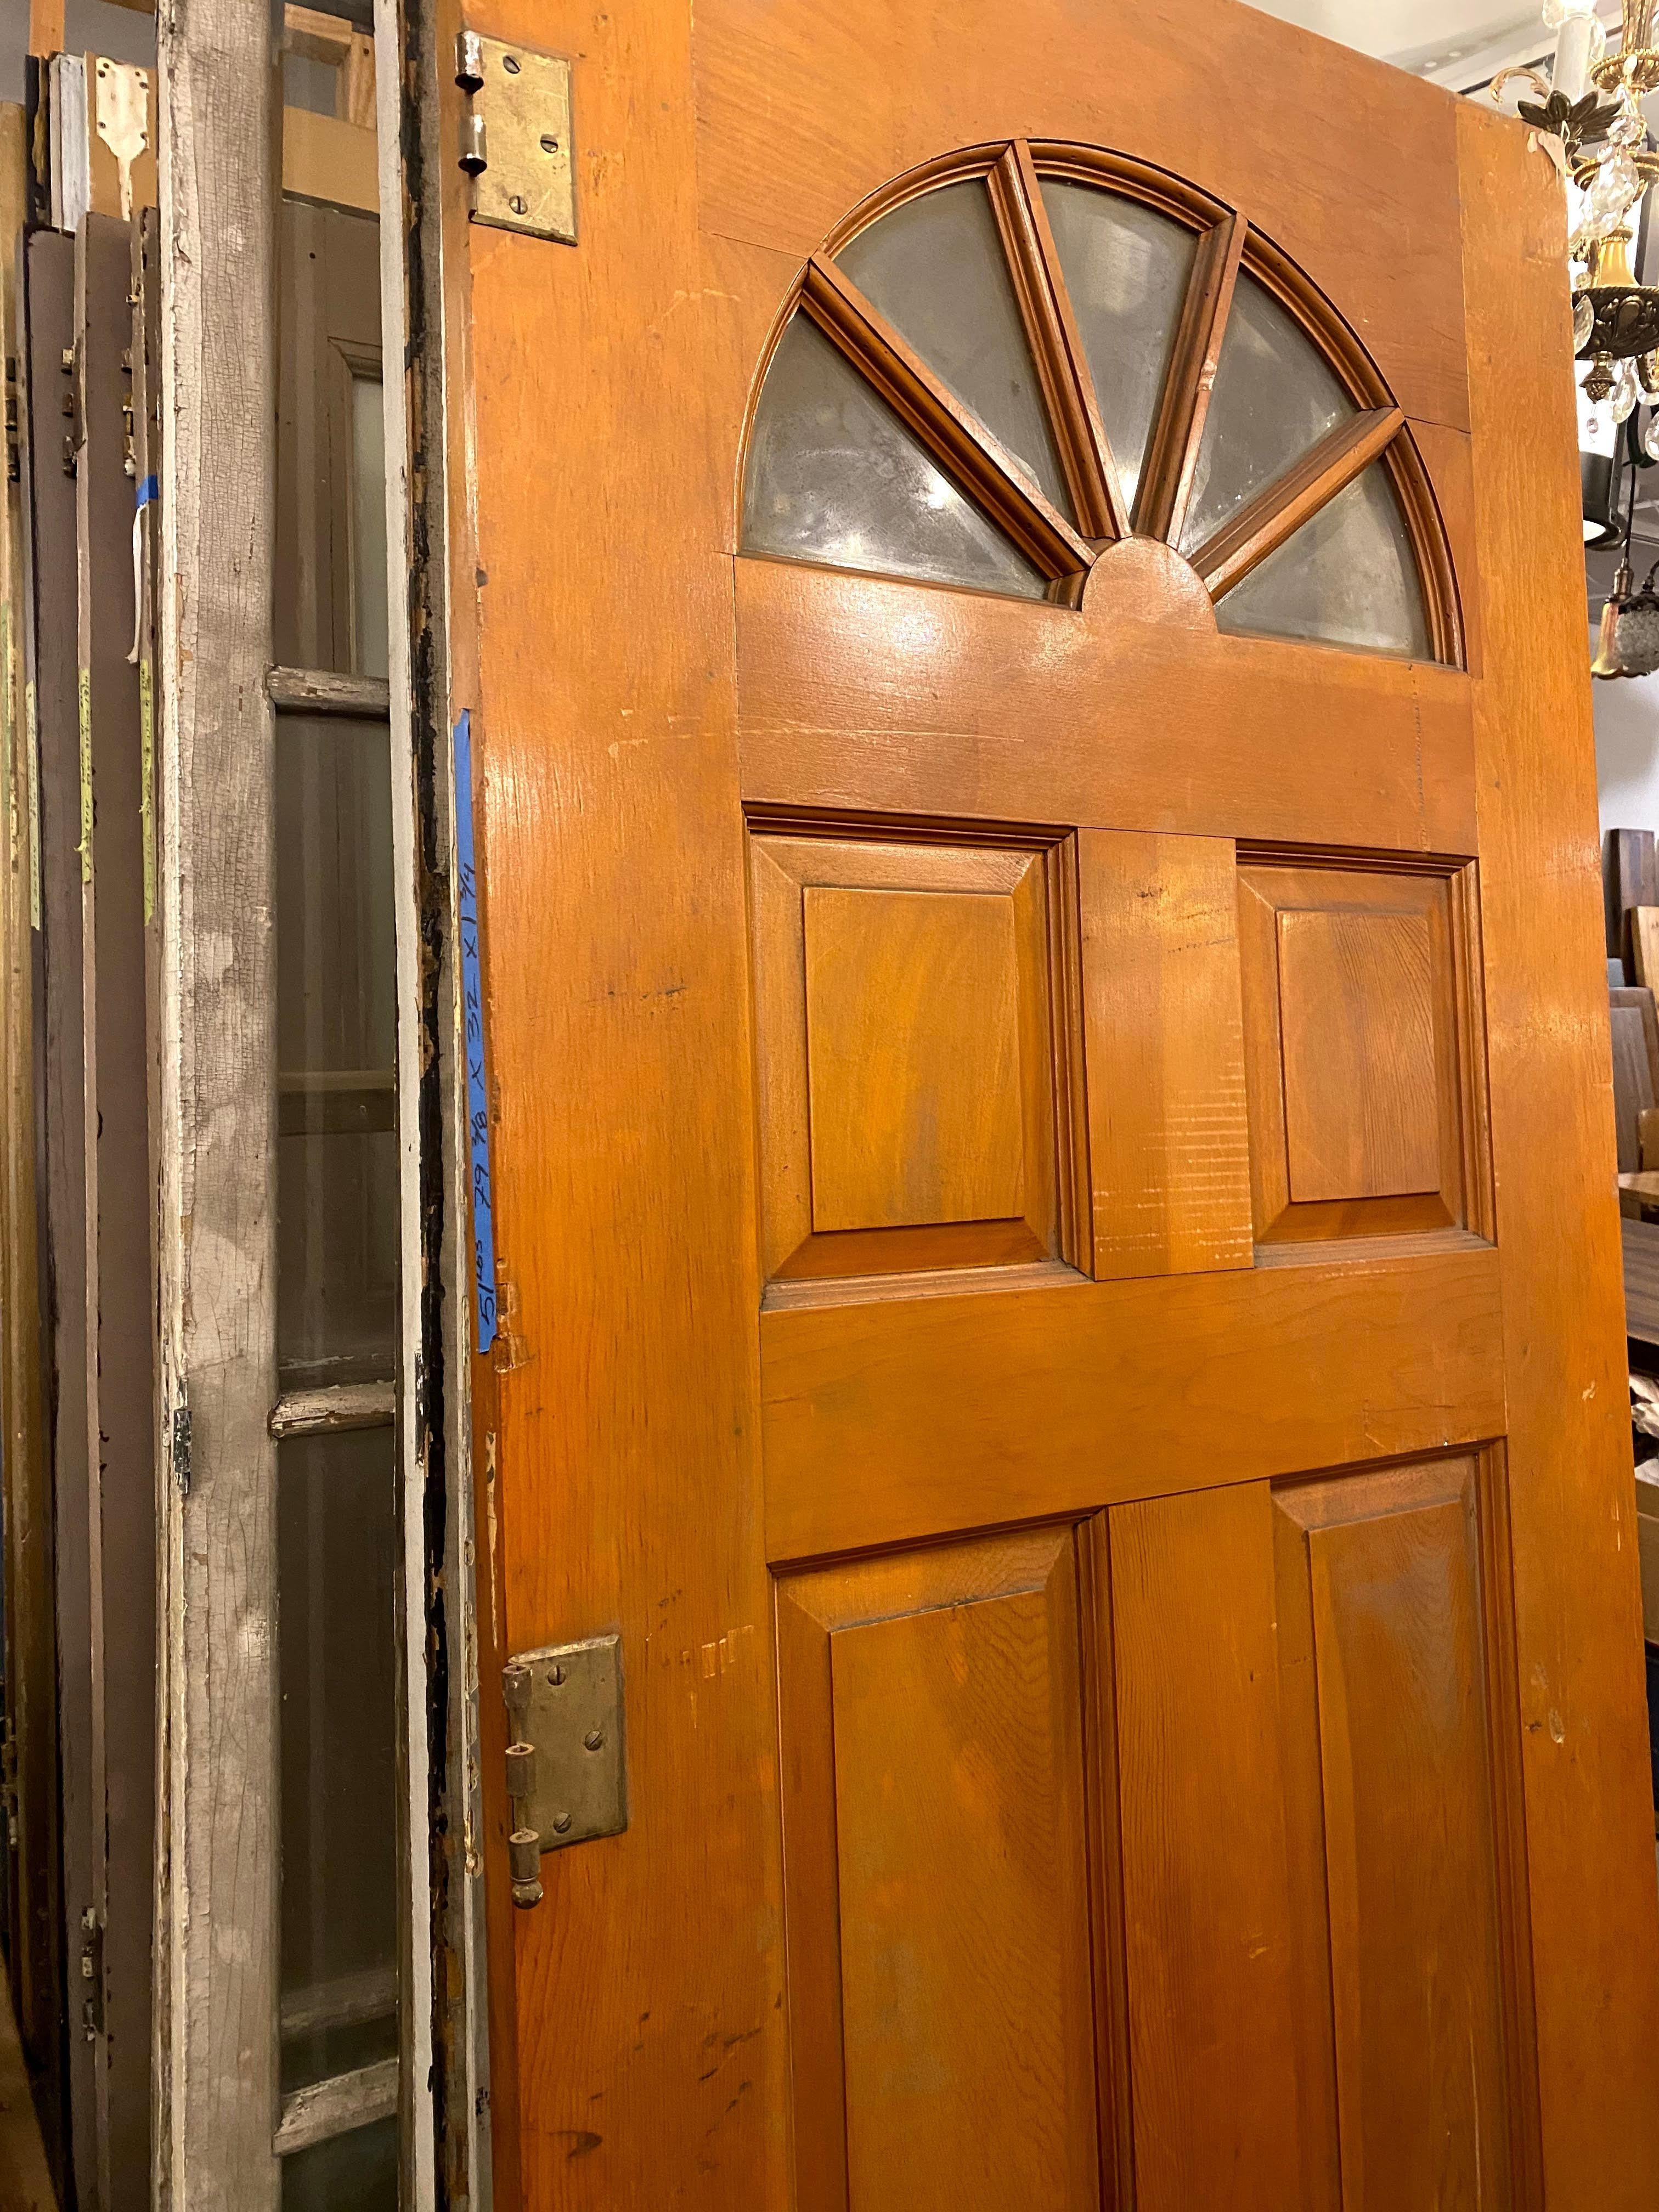 1930s Medium Tone Entry Door with Fan Shaped Glass Panes 3